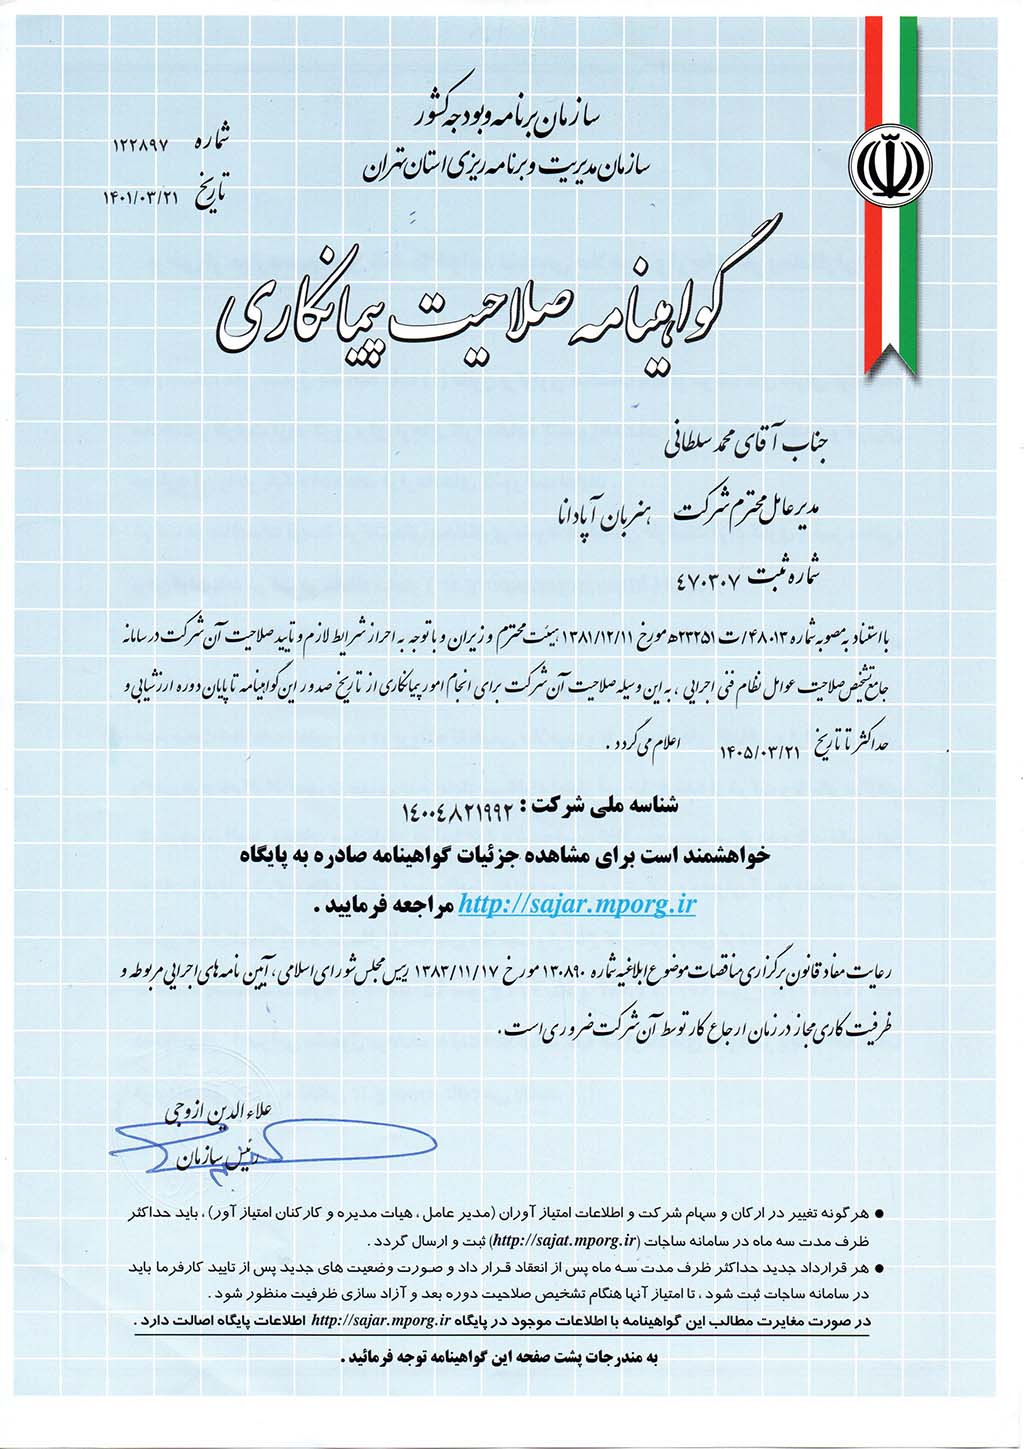 Contractor License from Iranian Officials